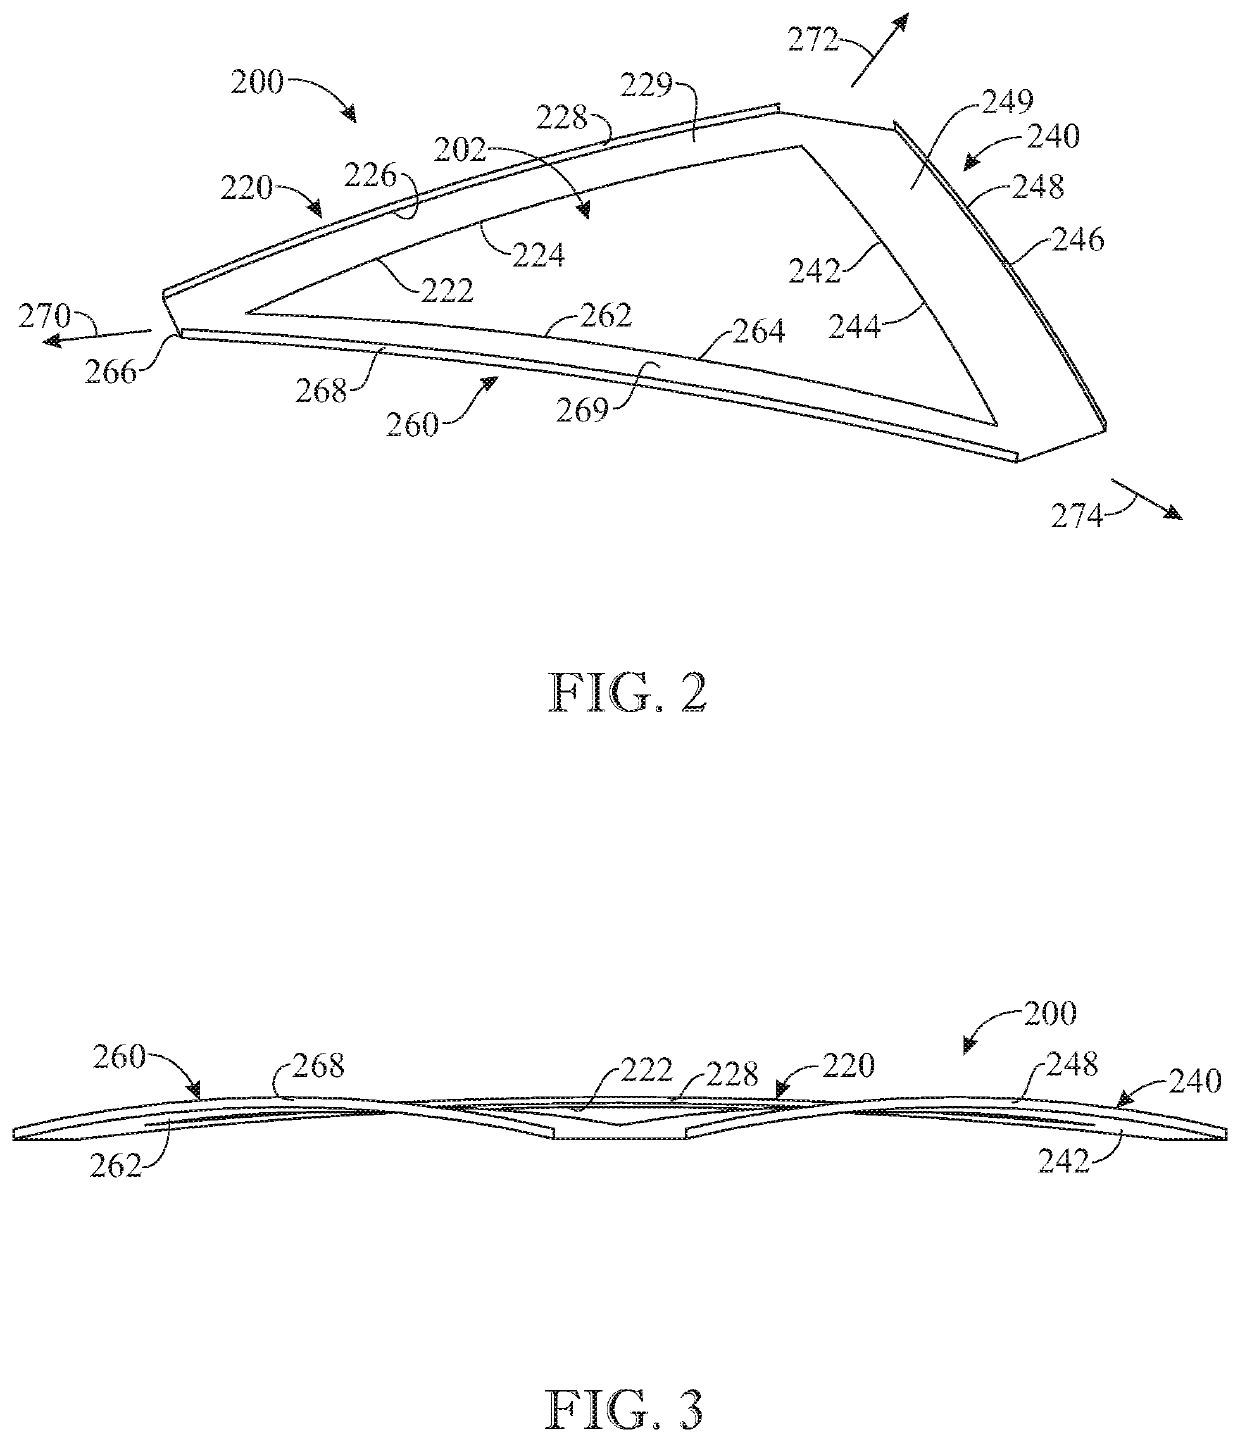 Fixed-wing flying device configured to fly in multiple directions